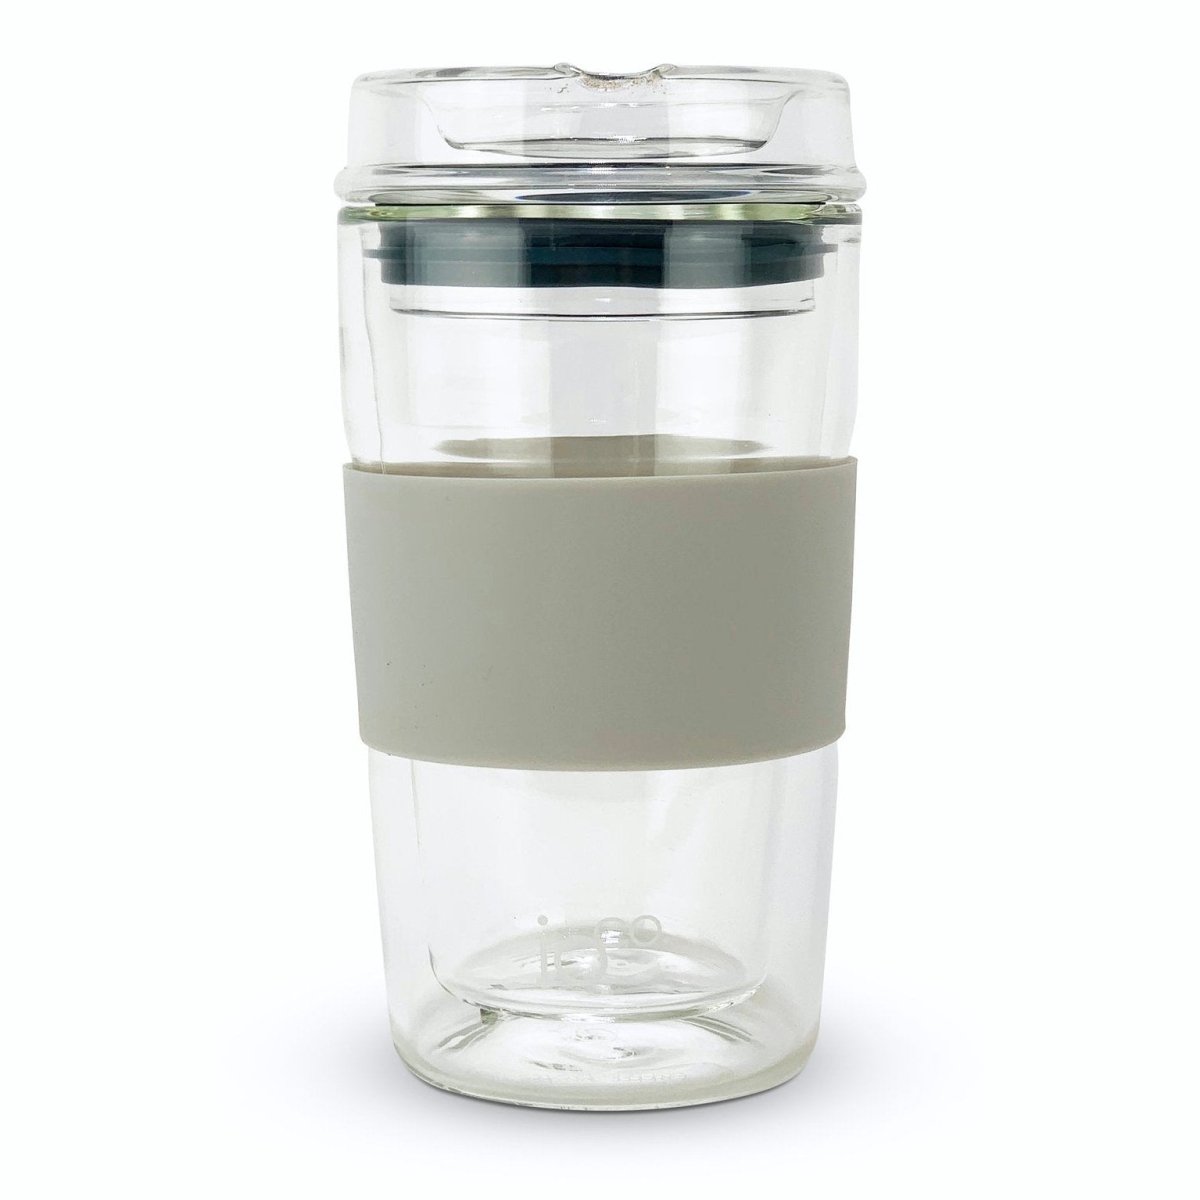 IOco 12oz Glass Coffee Traveller Cup - Warm Latte with Midnight Blue Seal.